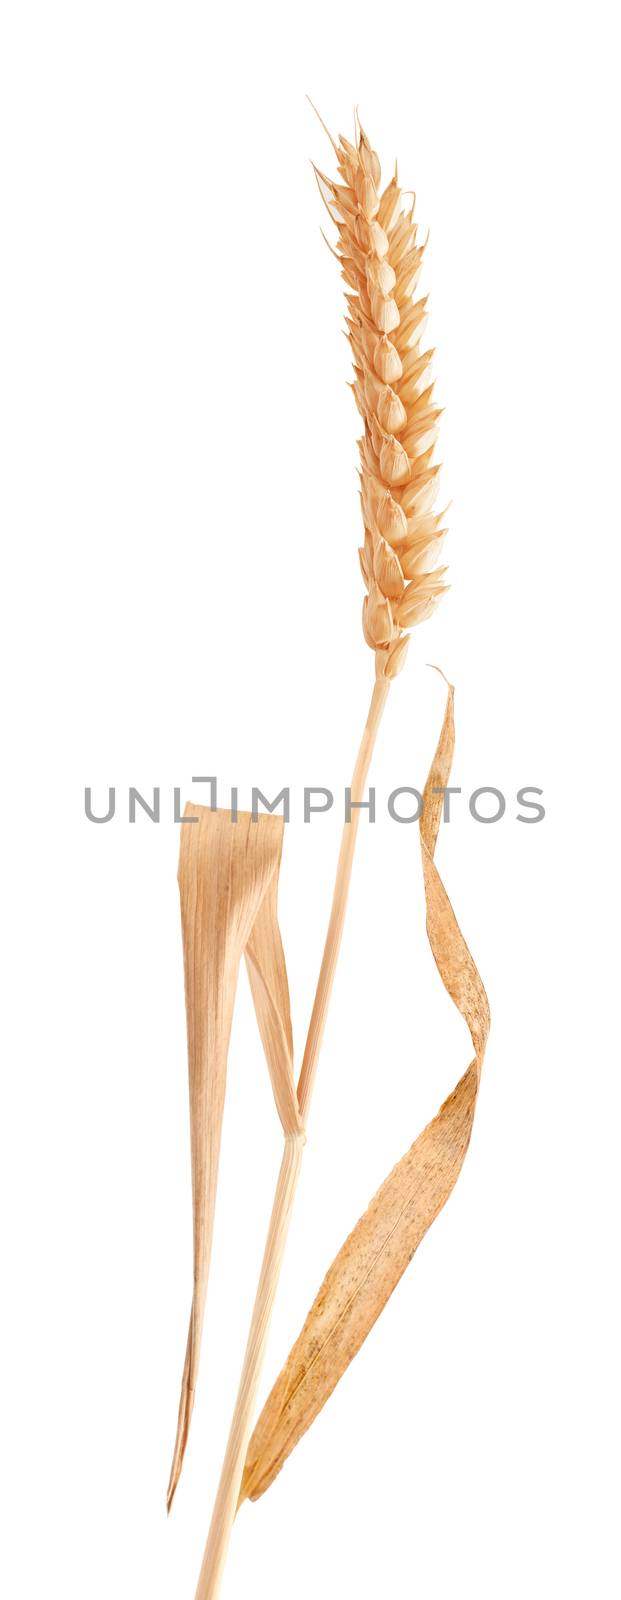 Spikelet of wheat with two leaves on the white